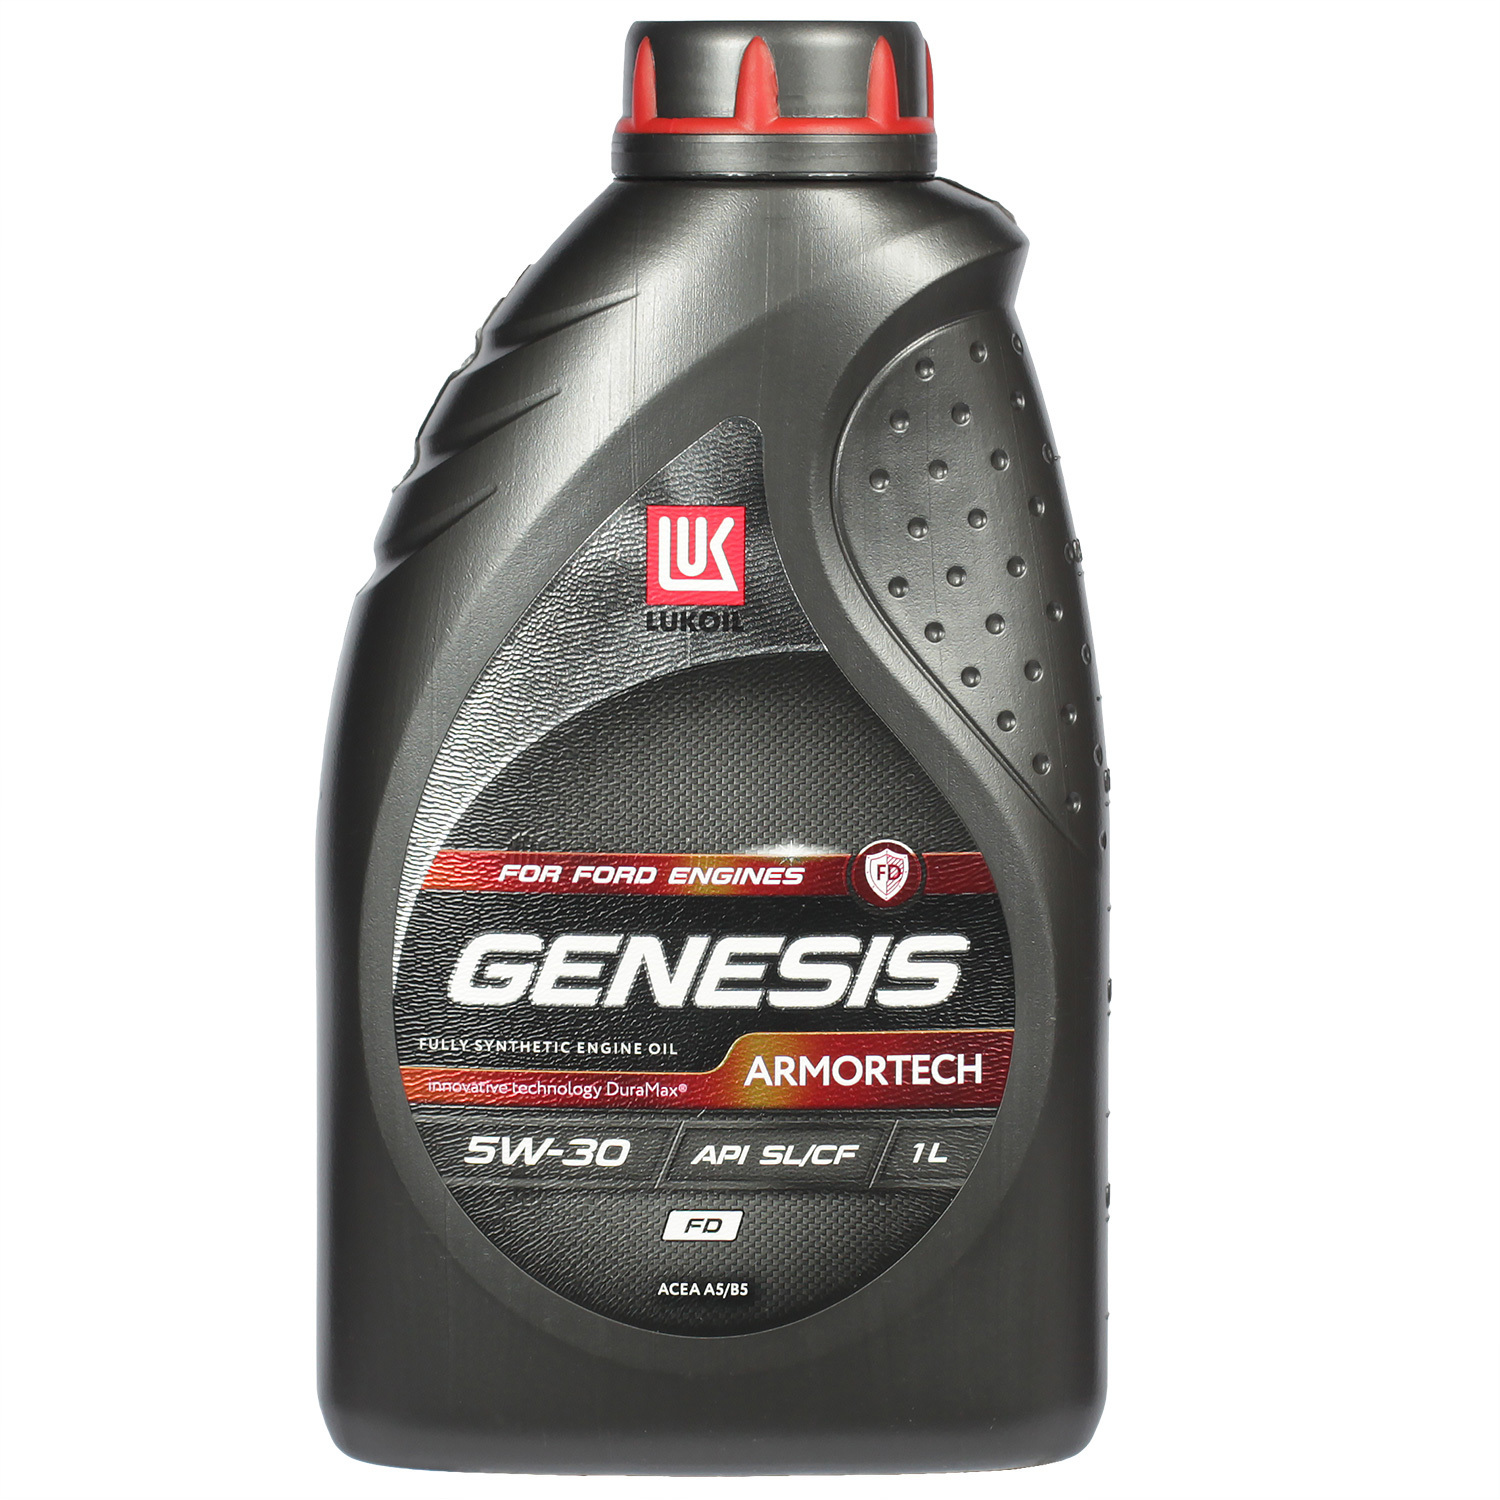 Lukoil Моторное масло Lukoil Genesis Armortech FD 5W-30, 1 л lukoil моторное масло lukoil genesis armortech diesel 5w 30 4 л